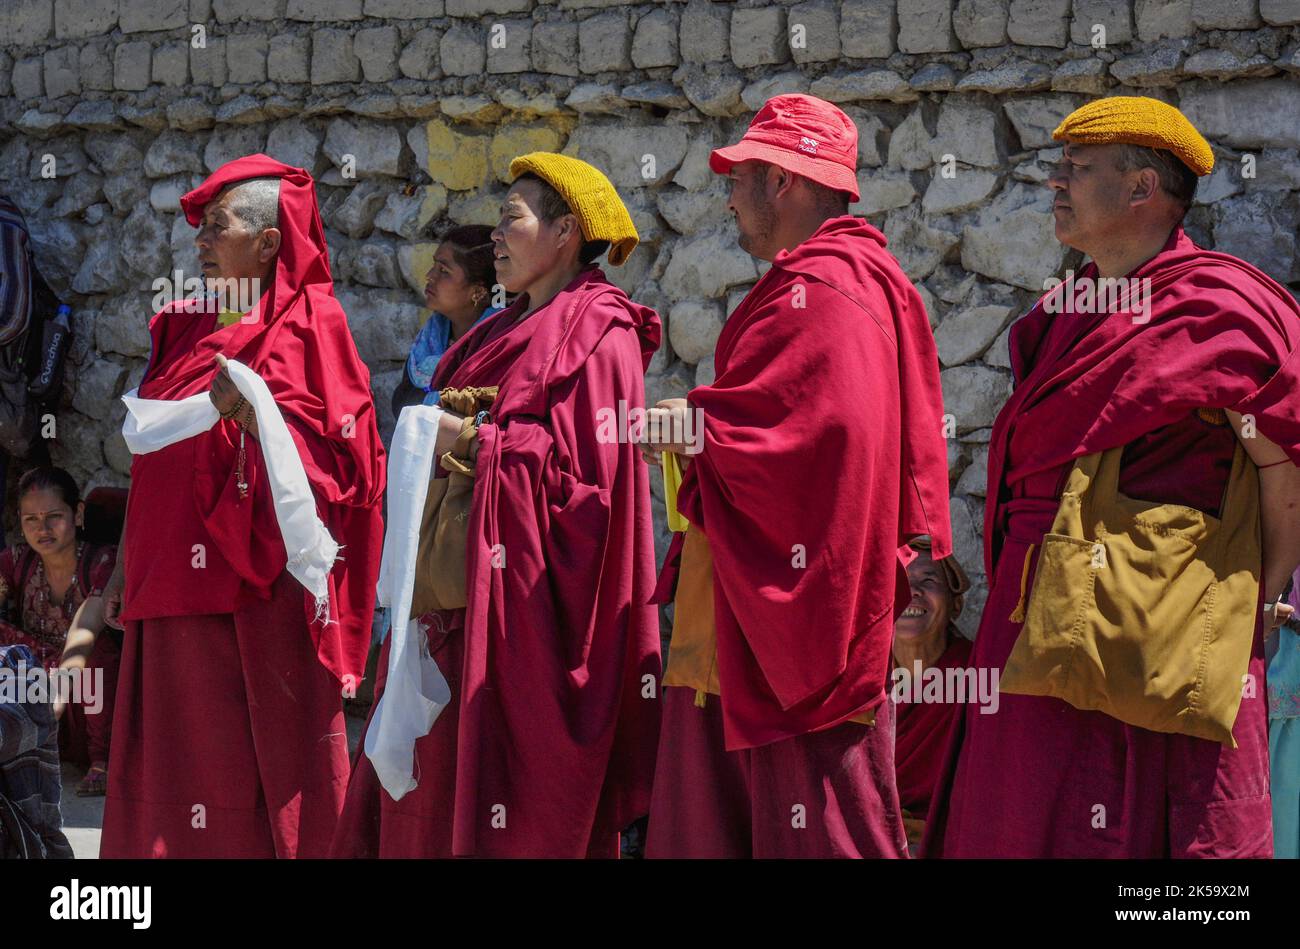 Buddhist monks attend festivities welcoming their spiritual leader, the exiled Dalai Lama of Tibet, on a 2012 visit to Ladakh, north-western India Stock Photo